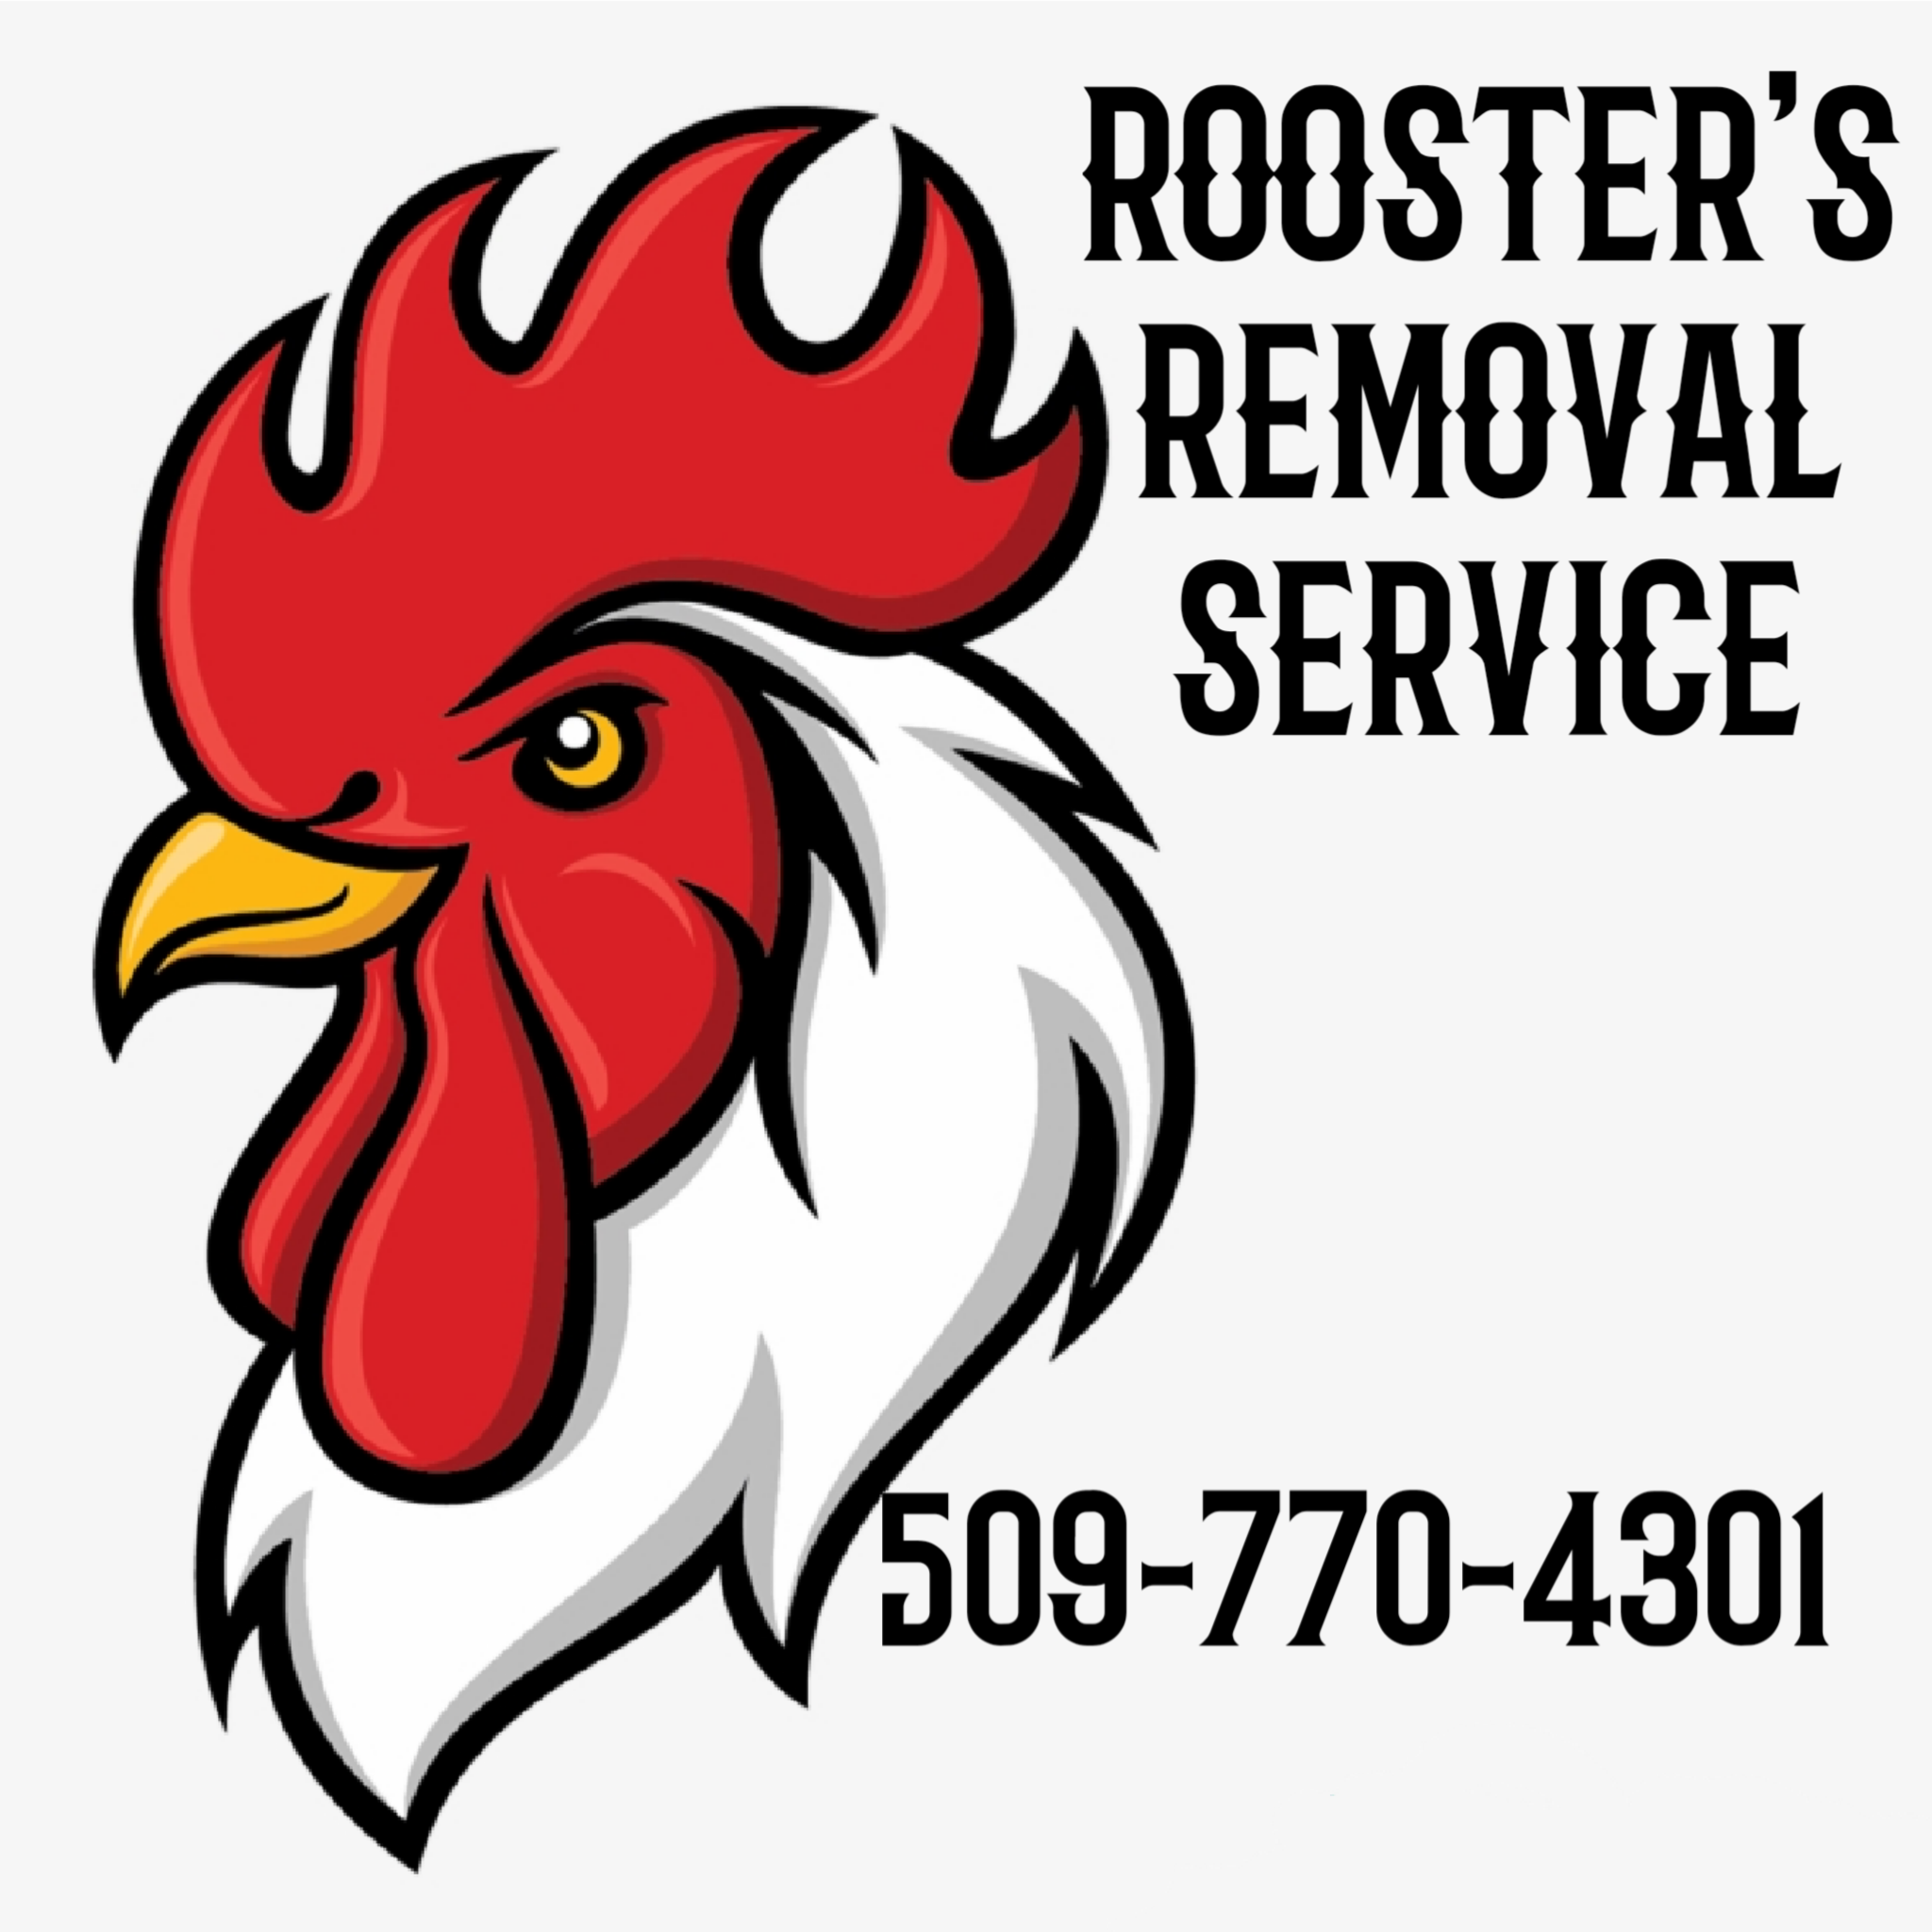 Roosters Removal Service Logo